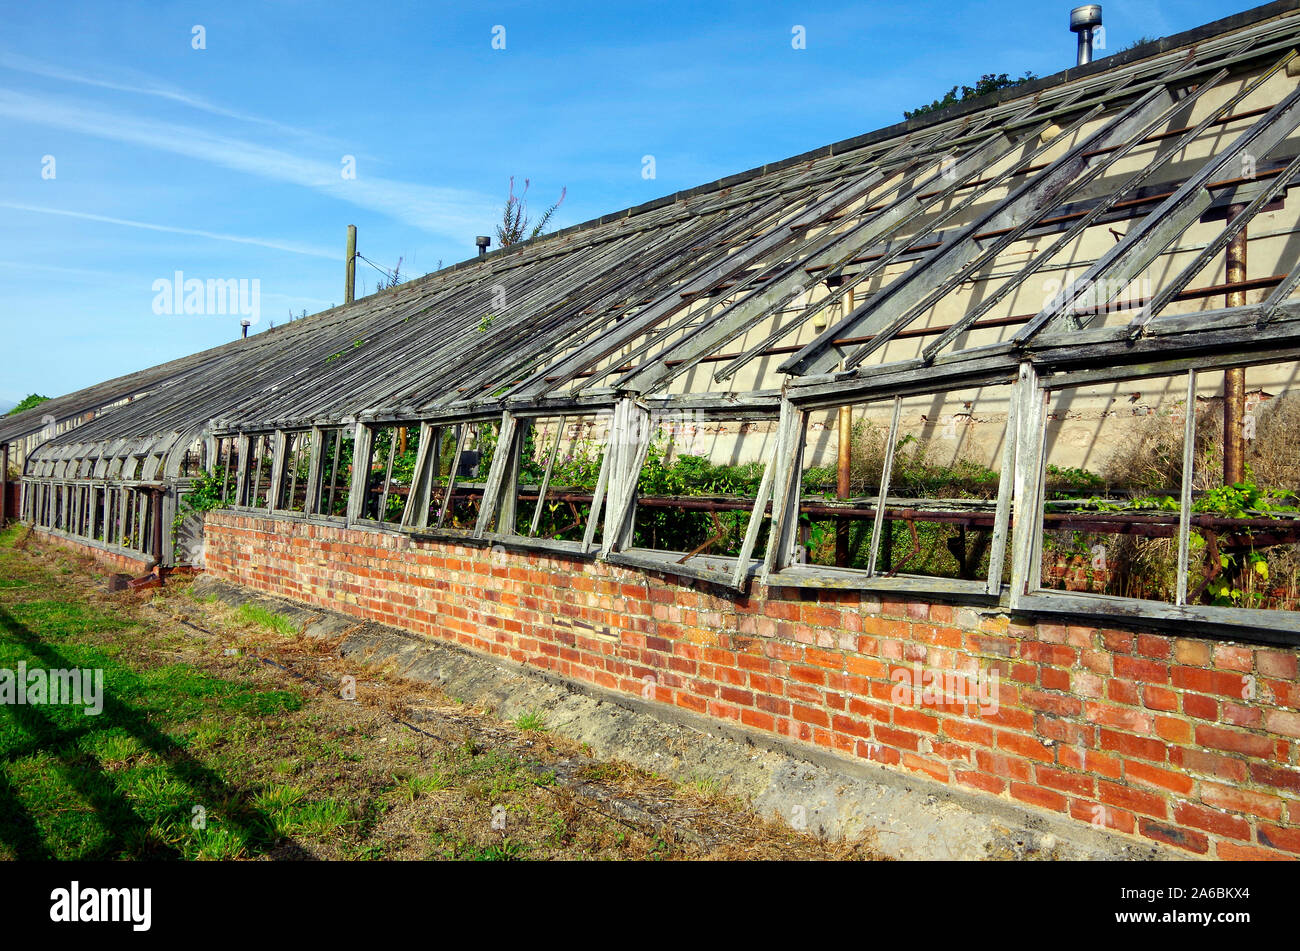 Abandoned and picturesquely decaying glass houses built against a south-facing wall in the grounds of Harewood House, Yorkshire Stock Photo